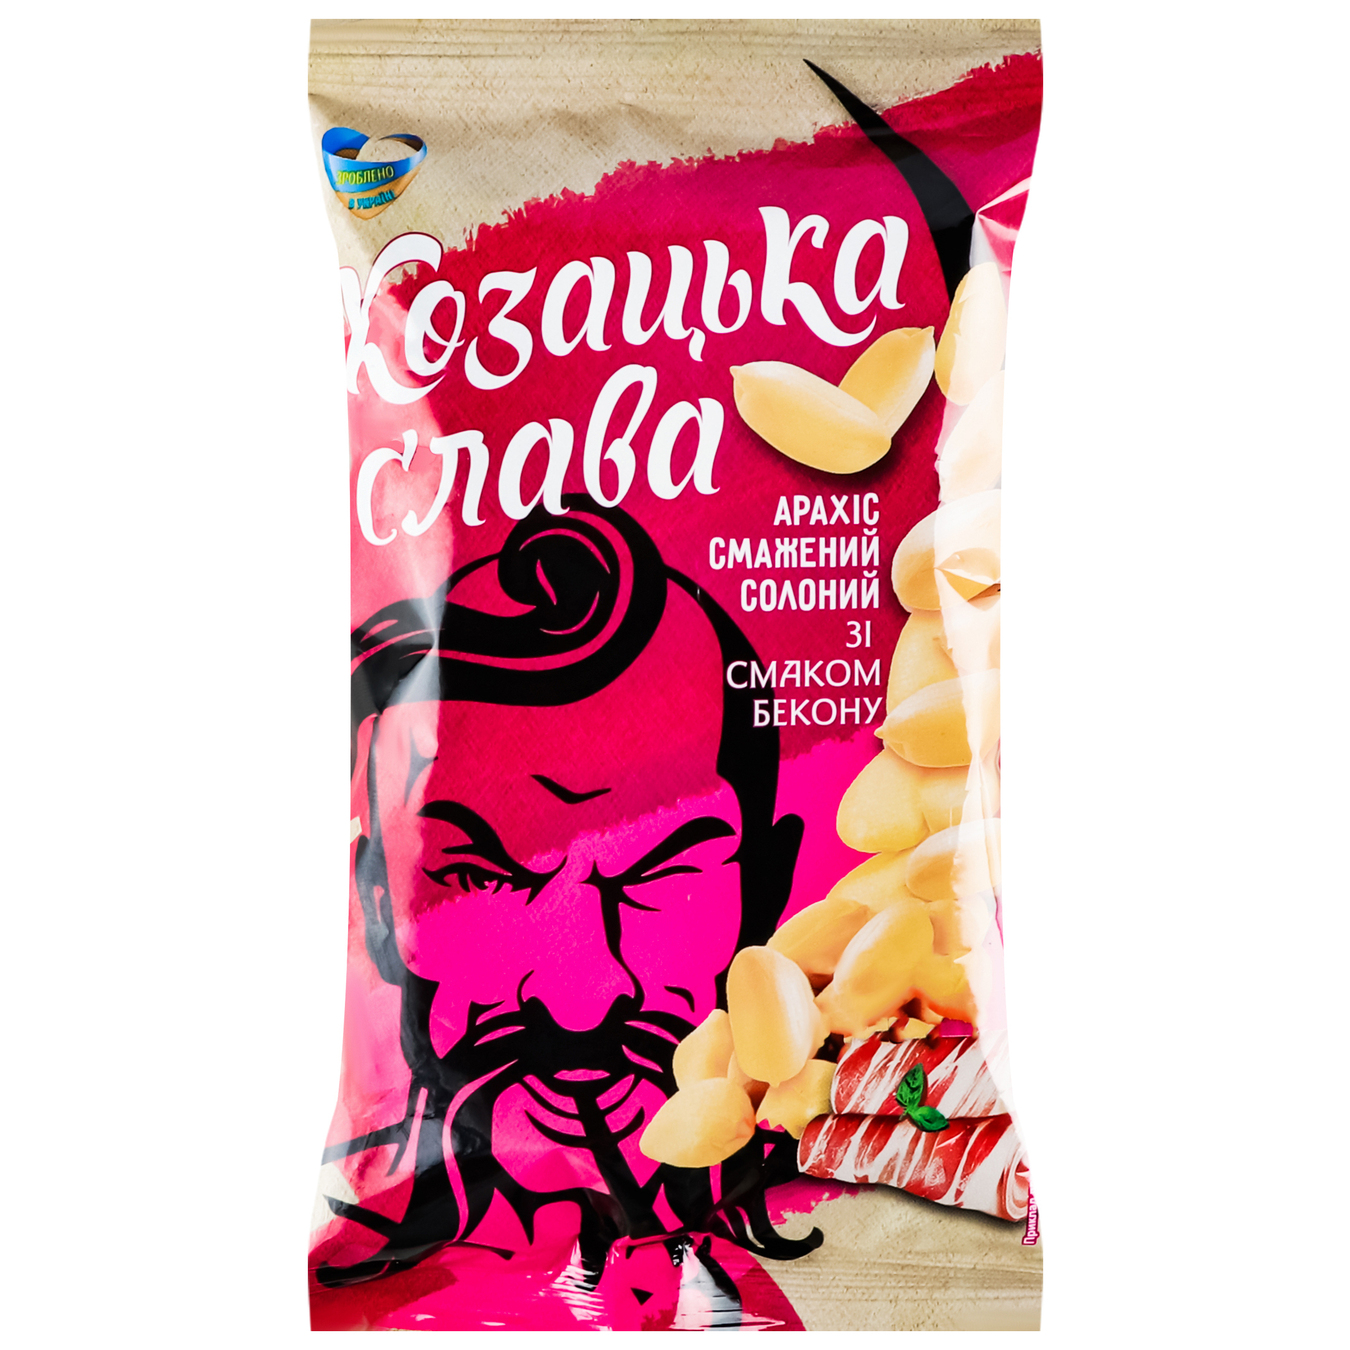 Peanuts Cossack glory fried salted bacon 110g